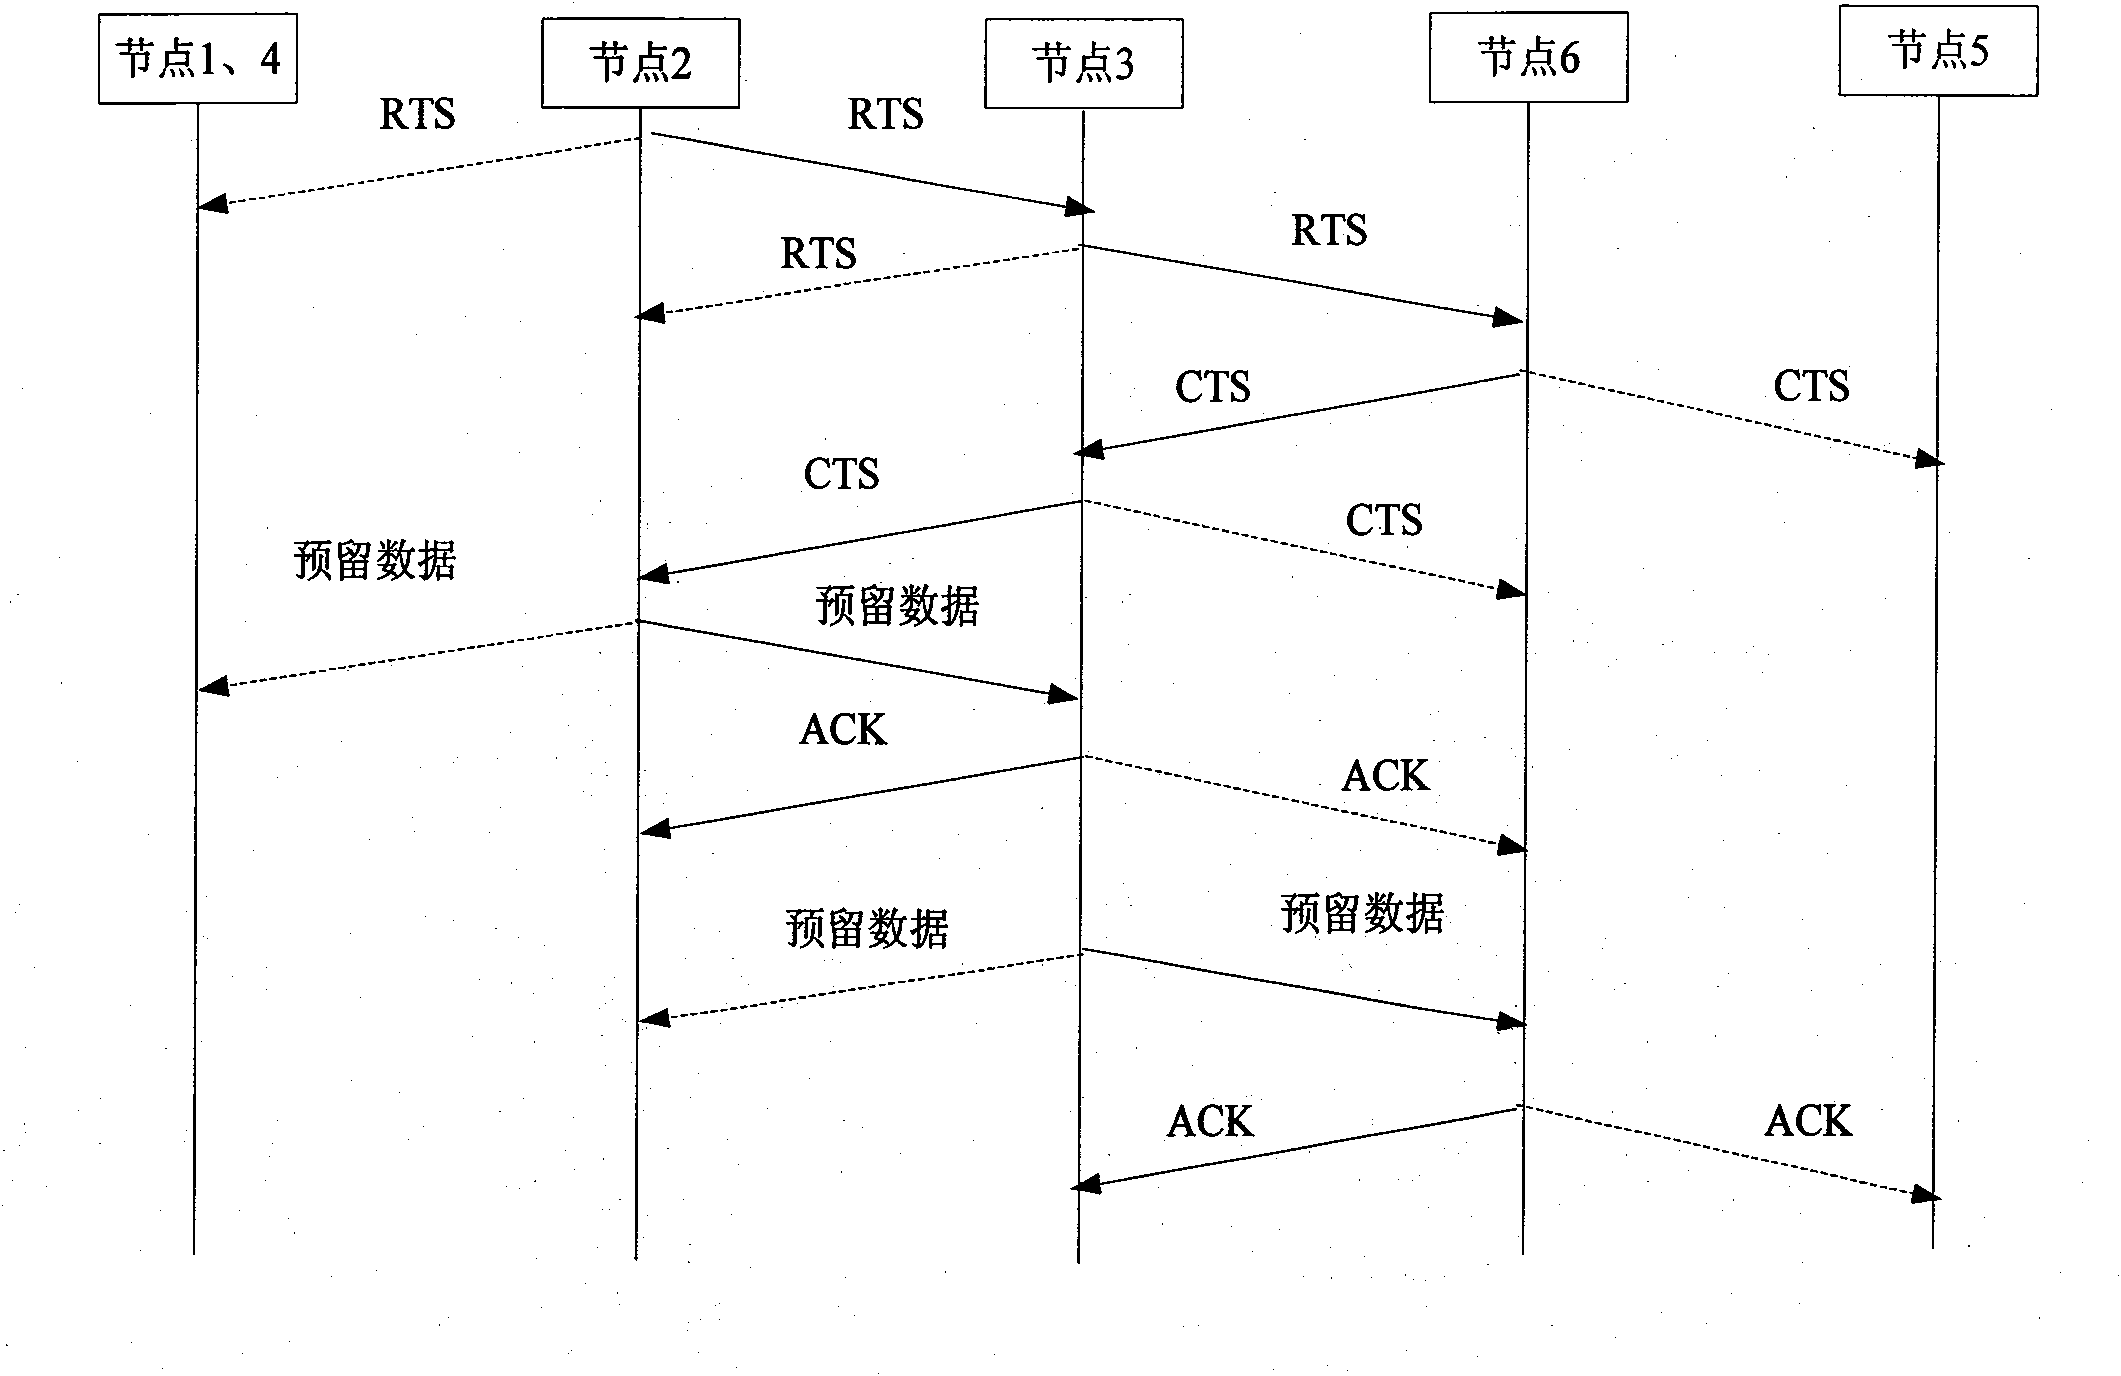 Method for transmitting real-time data and non-real time data by Ad Hoc web radio station